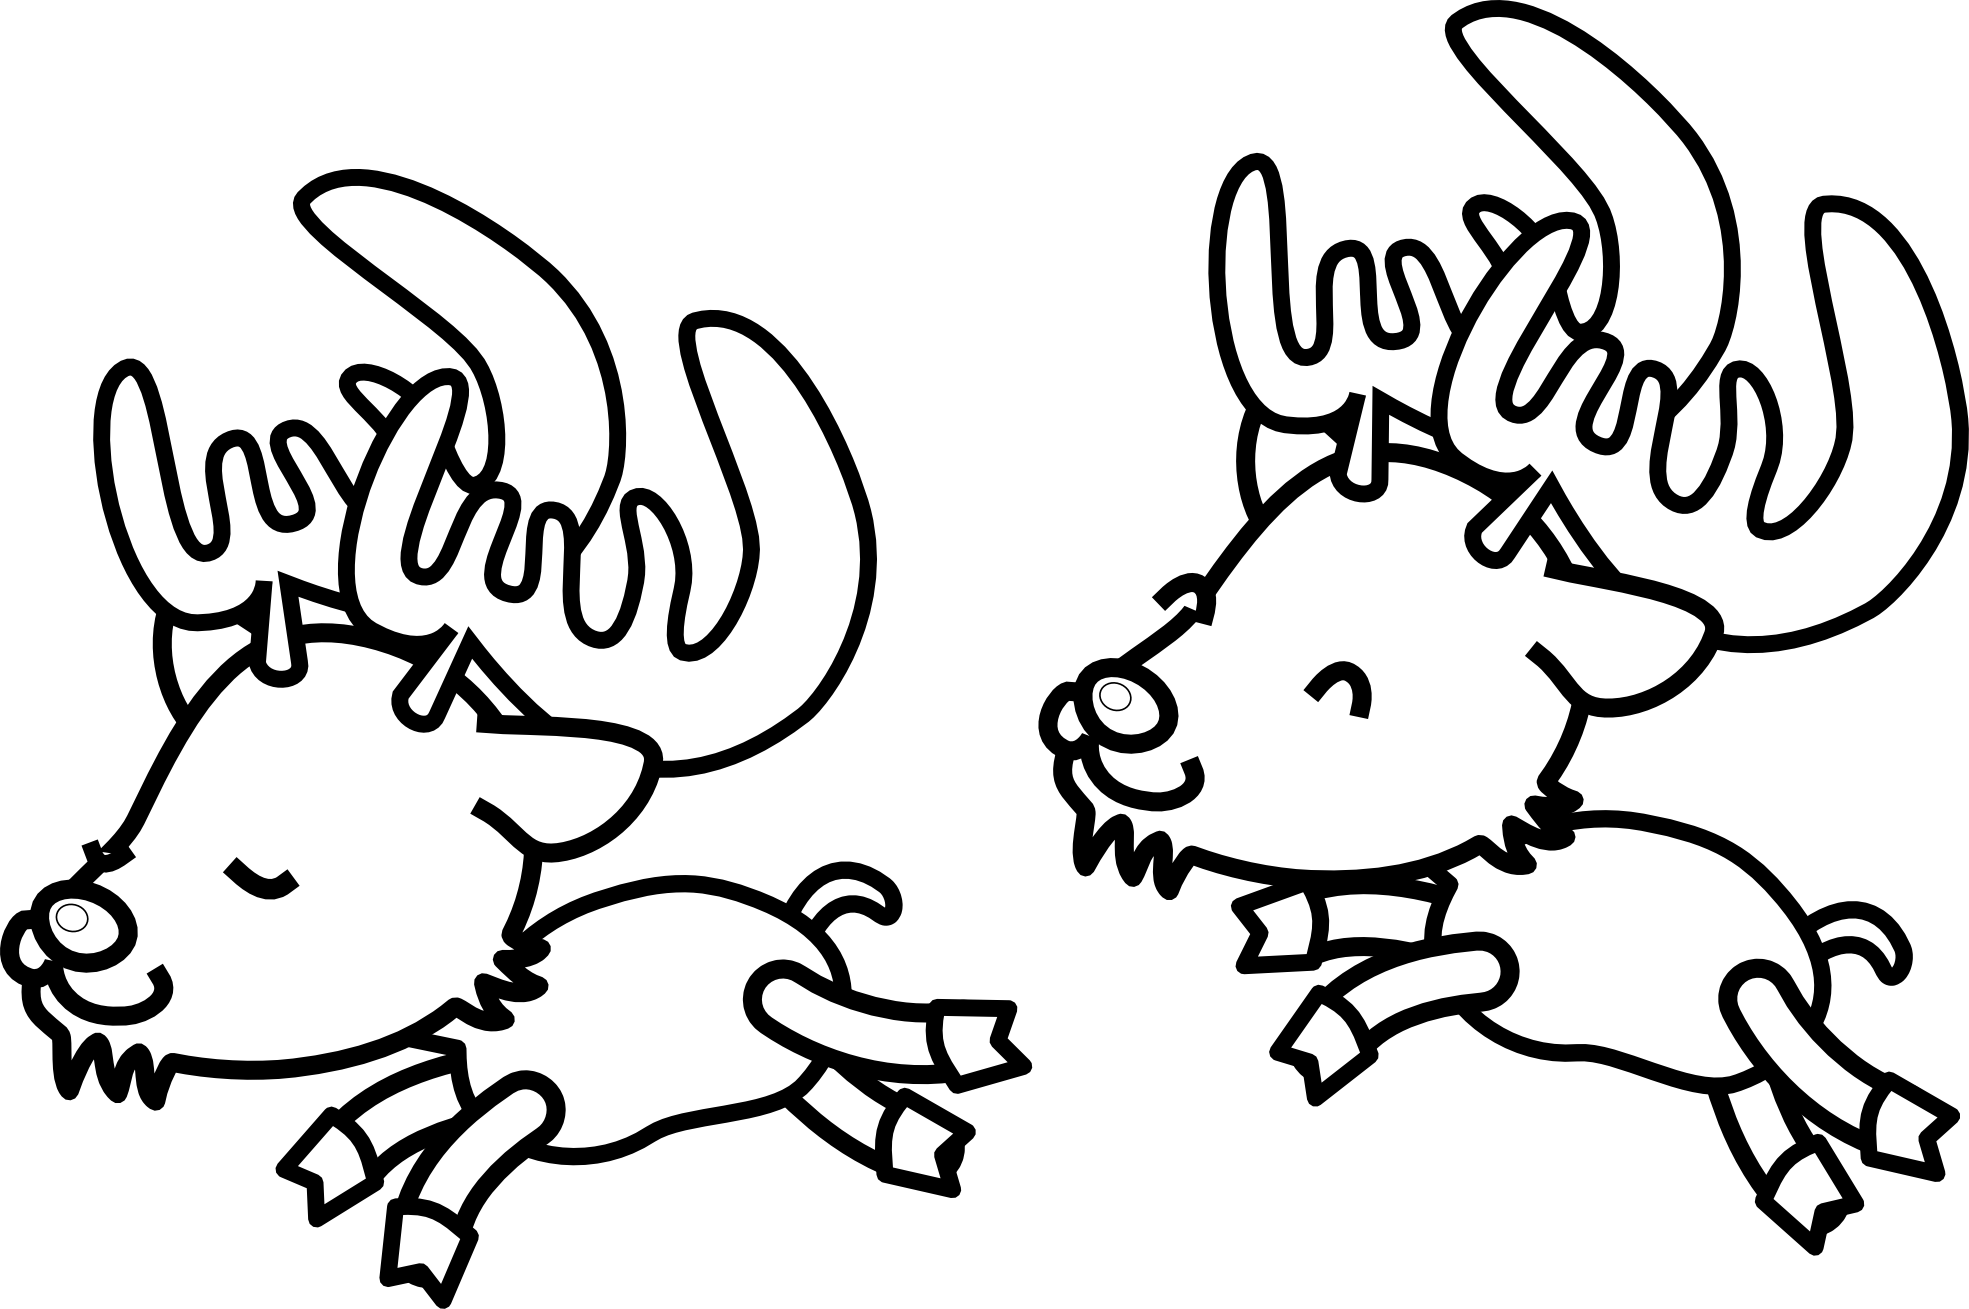 free black and white reindeer clipart - photo #6